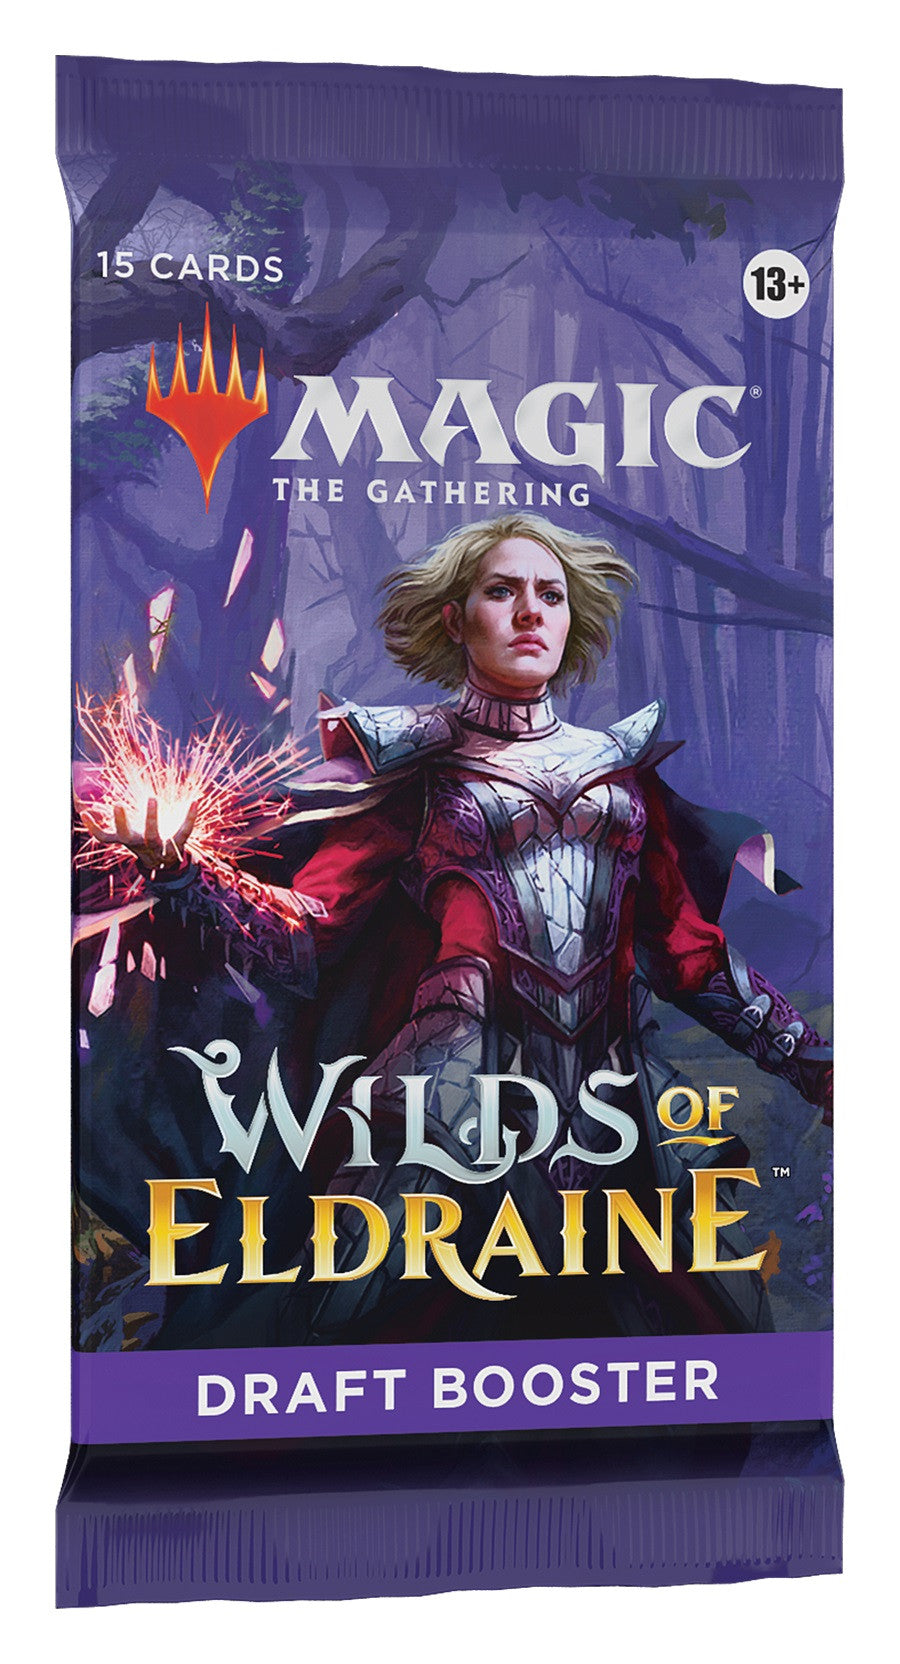 Magic the Gathering Wilds of Eldraine Draft Booster (SINGLE BOOSTER)